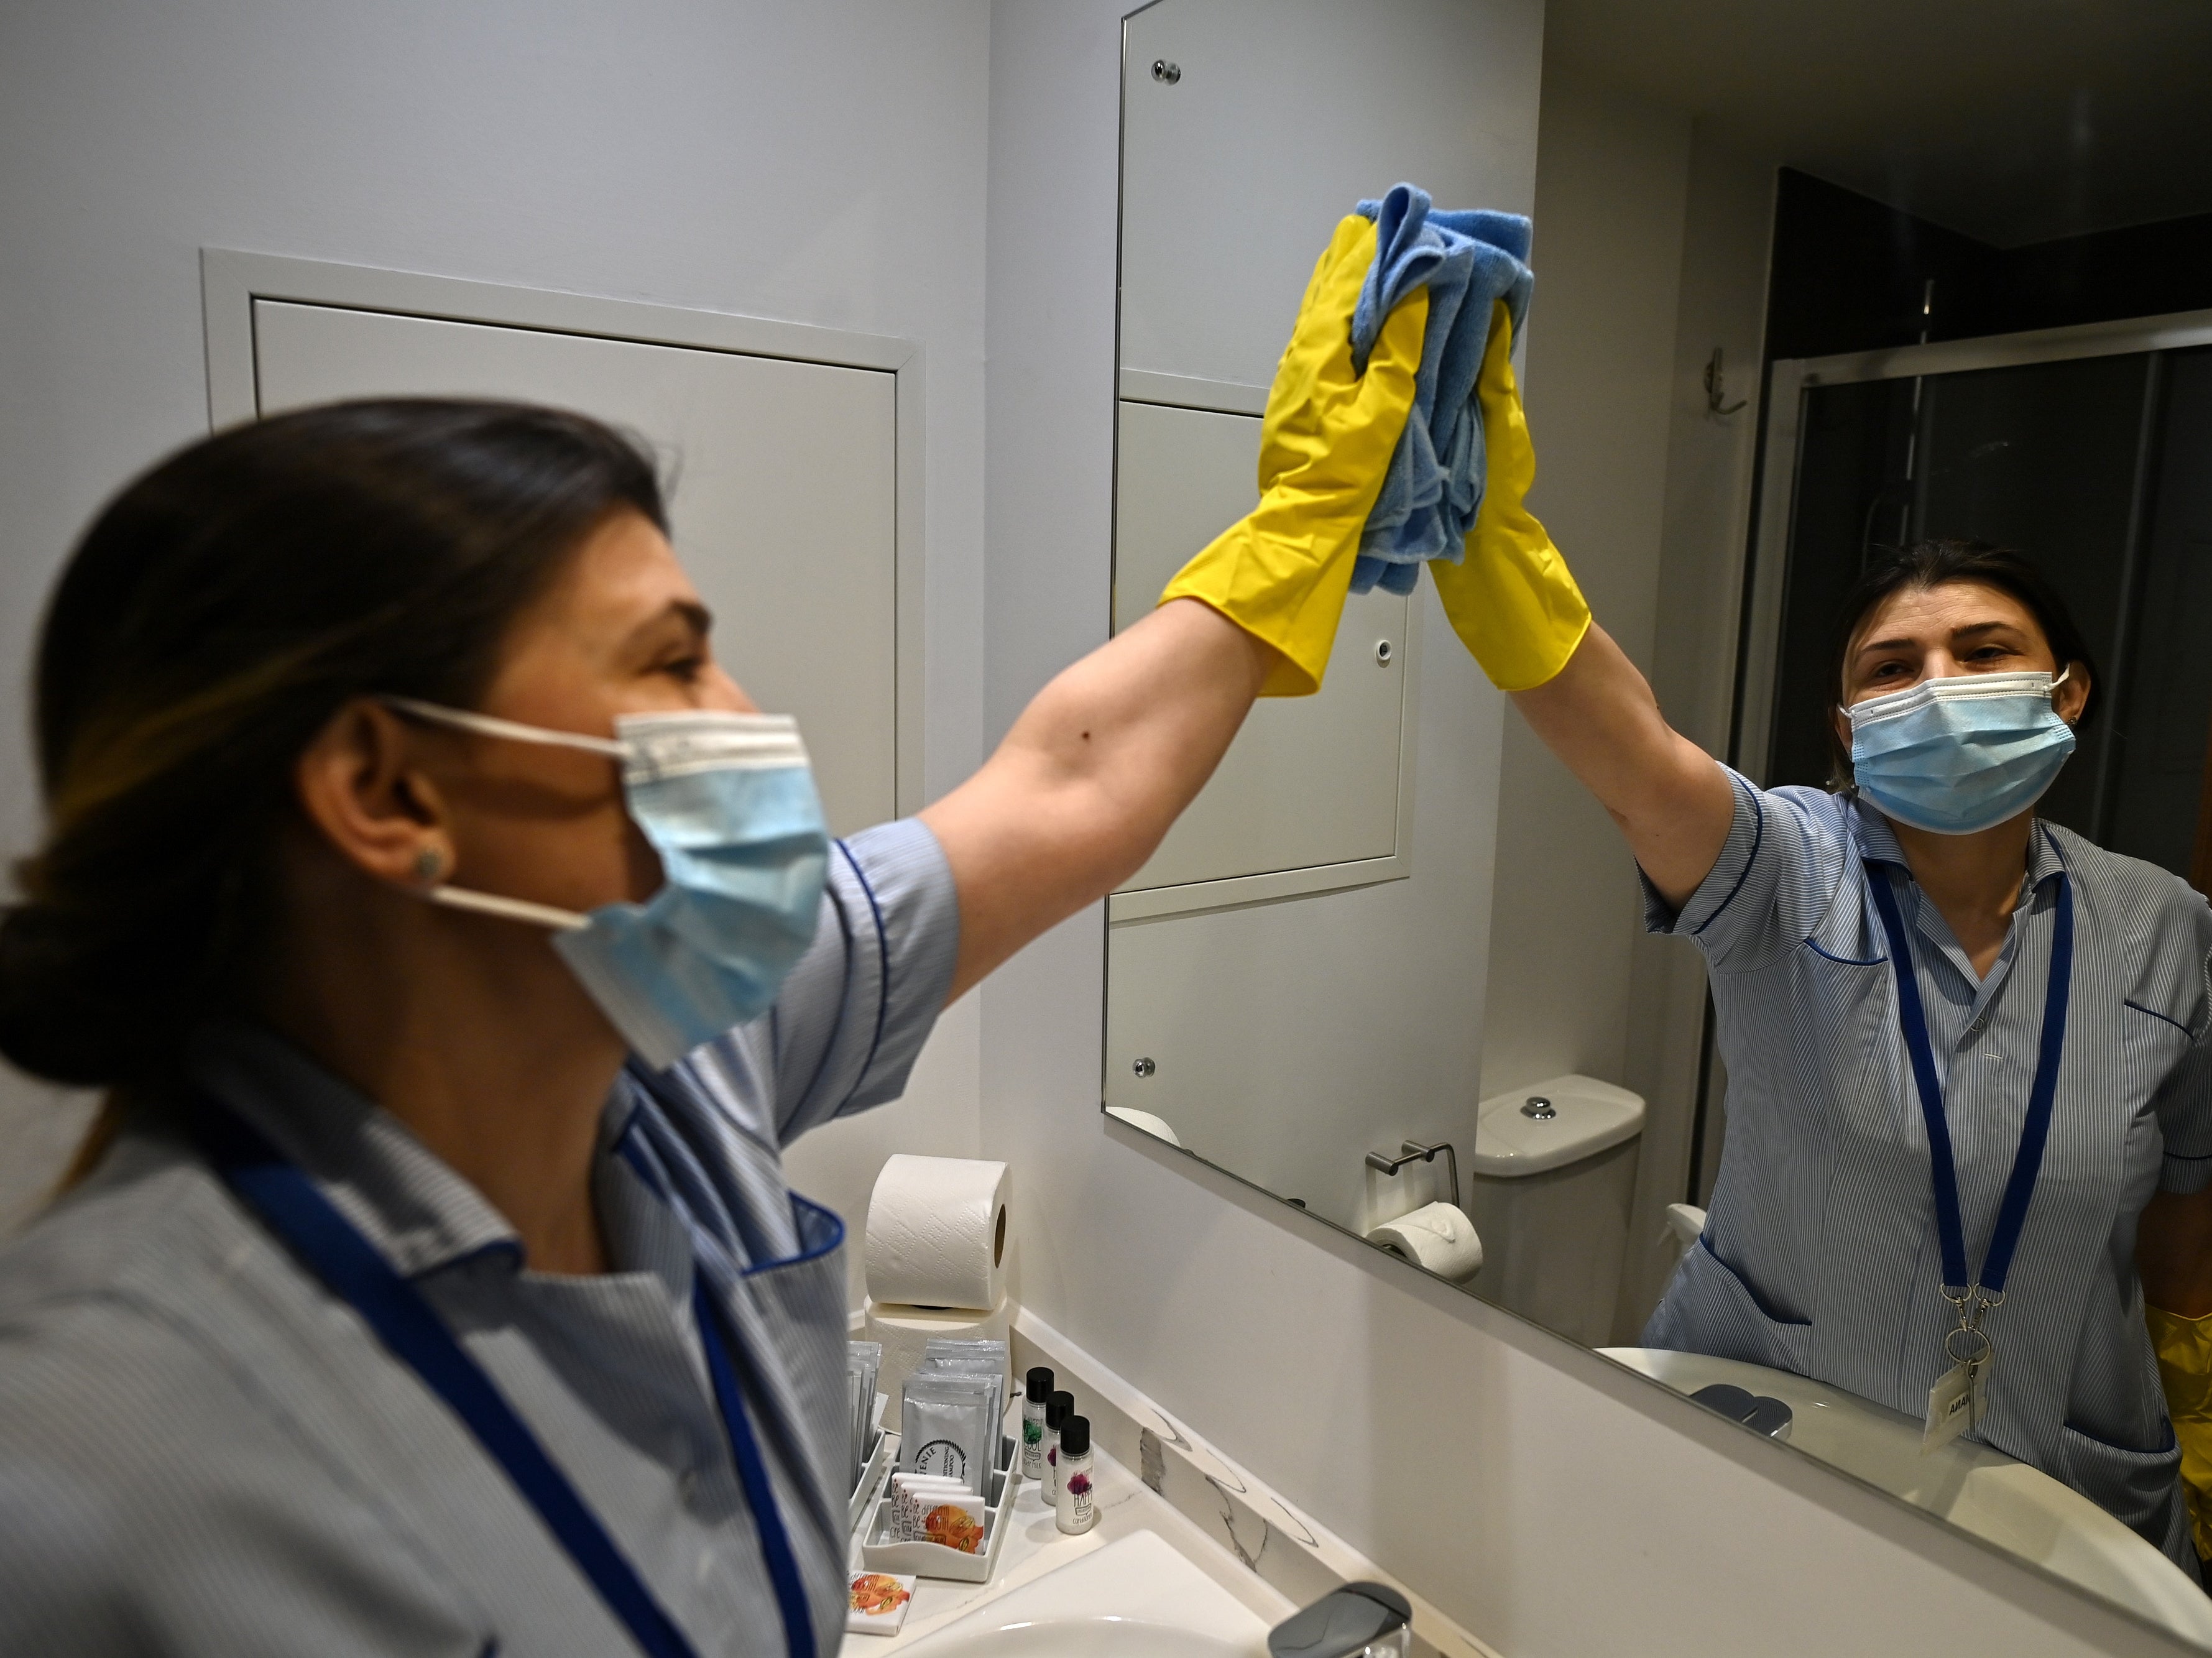 <p>A staff member cleans surfaces at a hotel near Heathrow Airport</p>